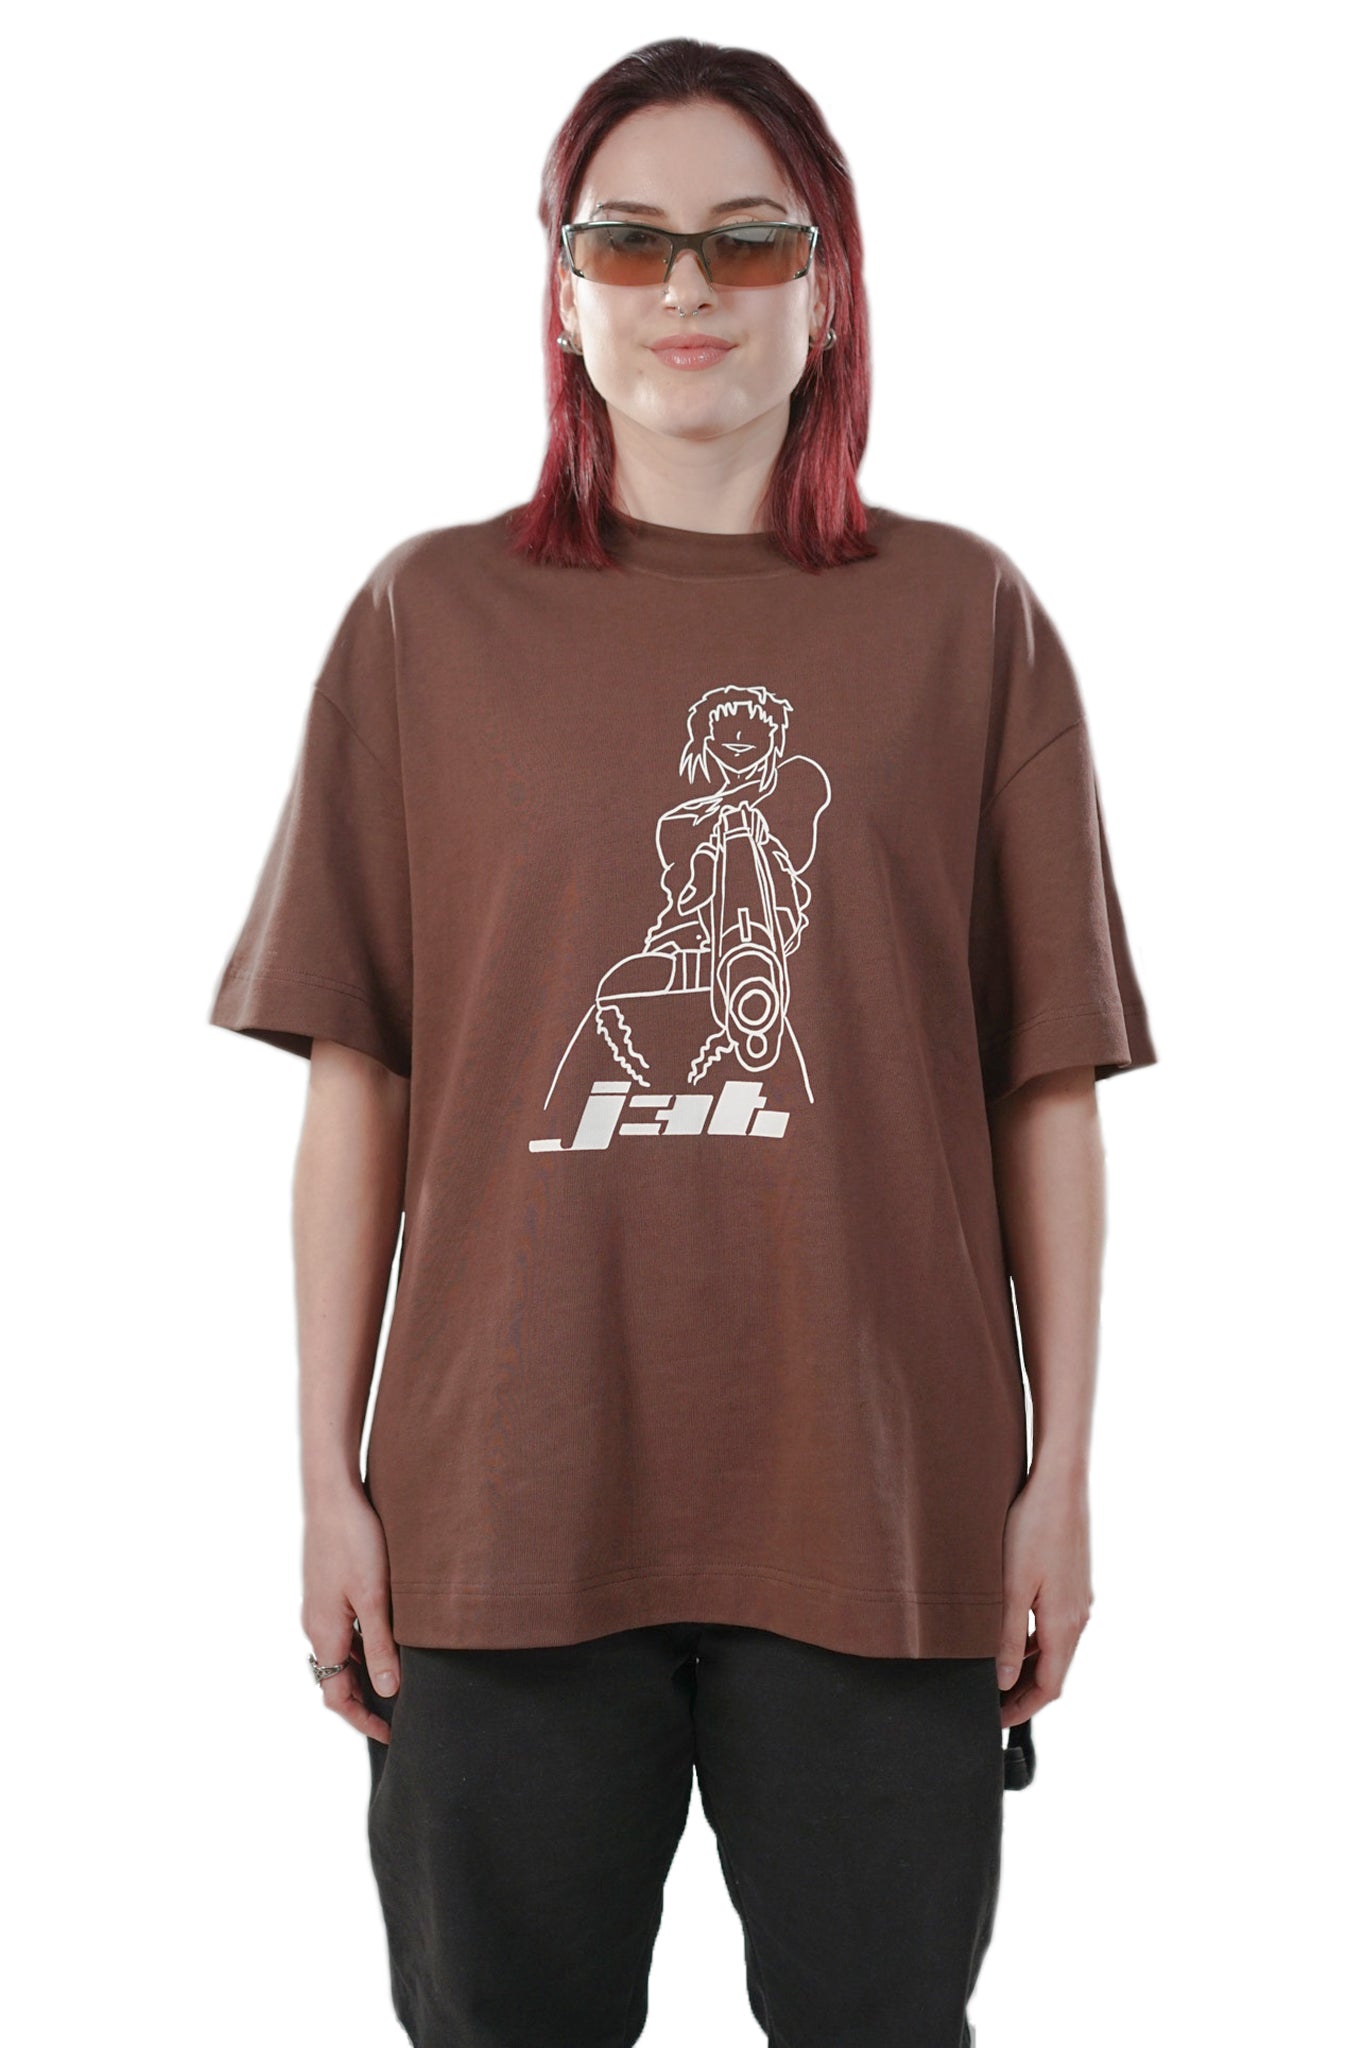 5'5" female wearing Remy Tee brown in a size large - medium shot